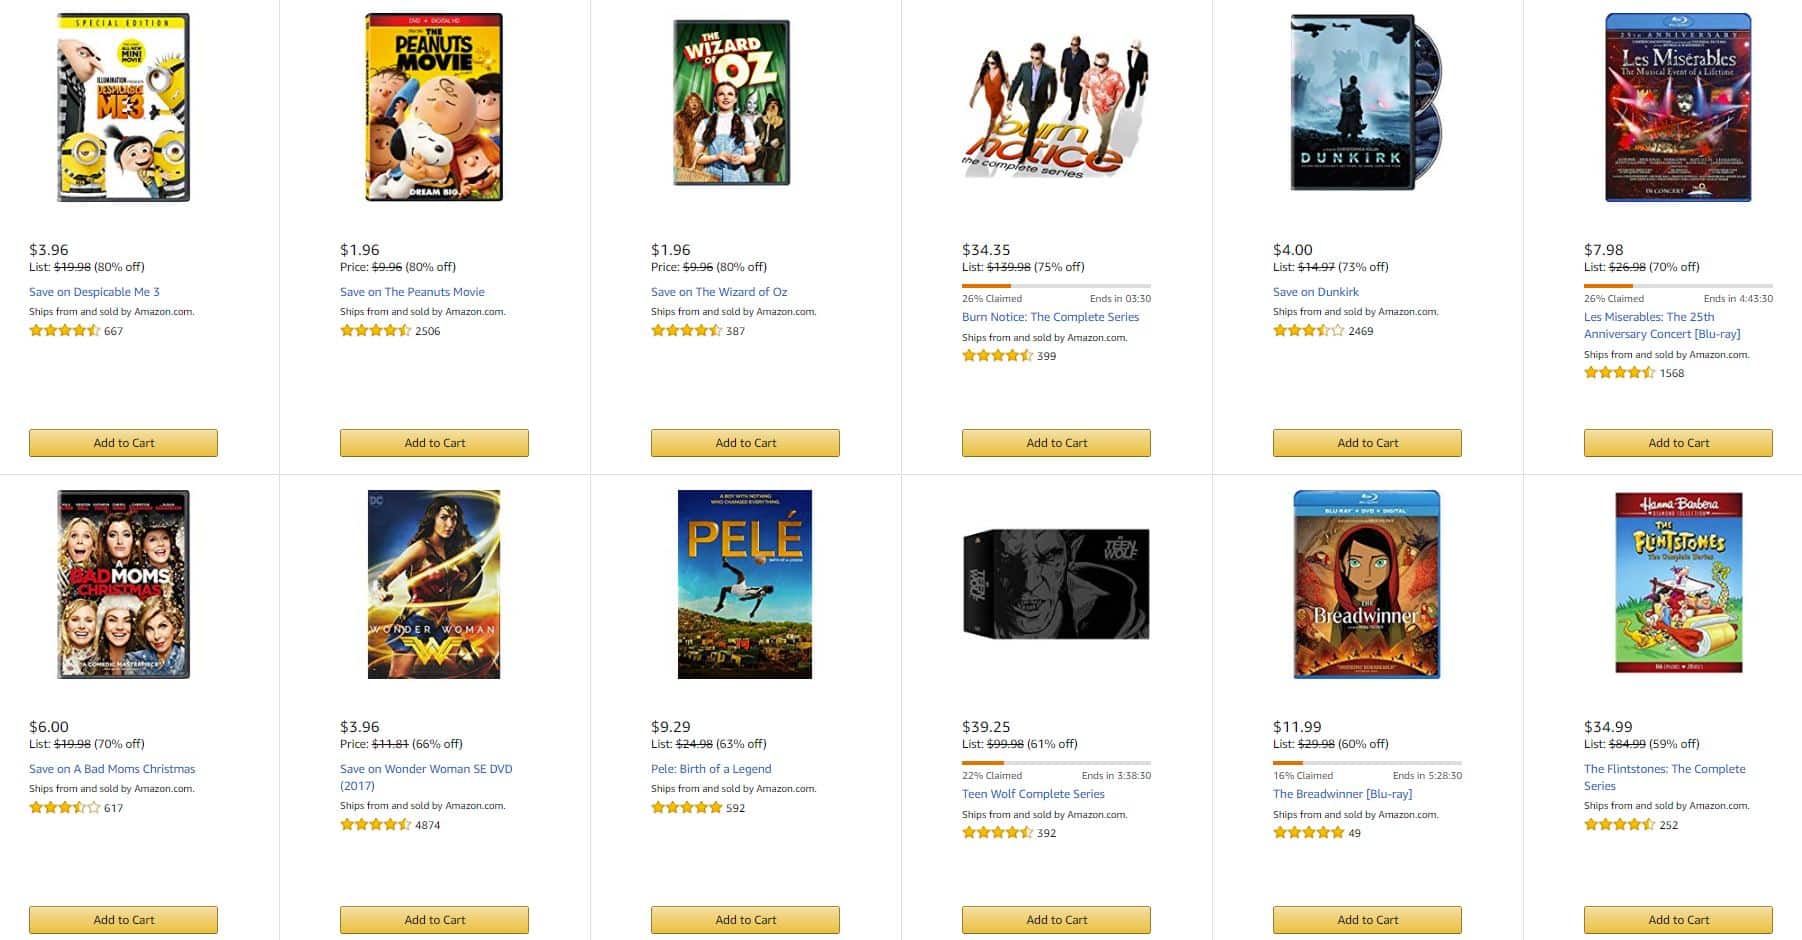 DEAL ALERT: Movies up to 80% off! Despicable Me 3, Peanuts Movie, Wonder Woman SE and more!